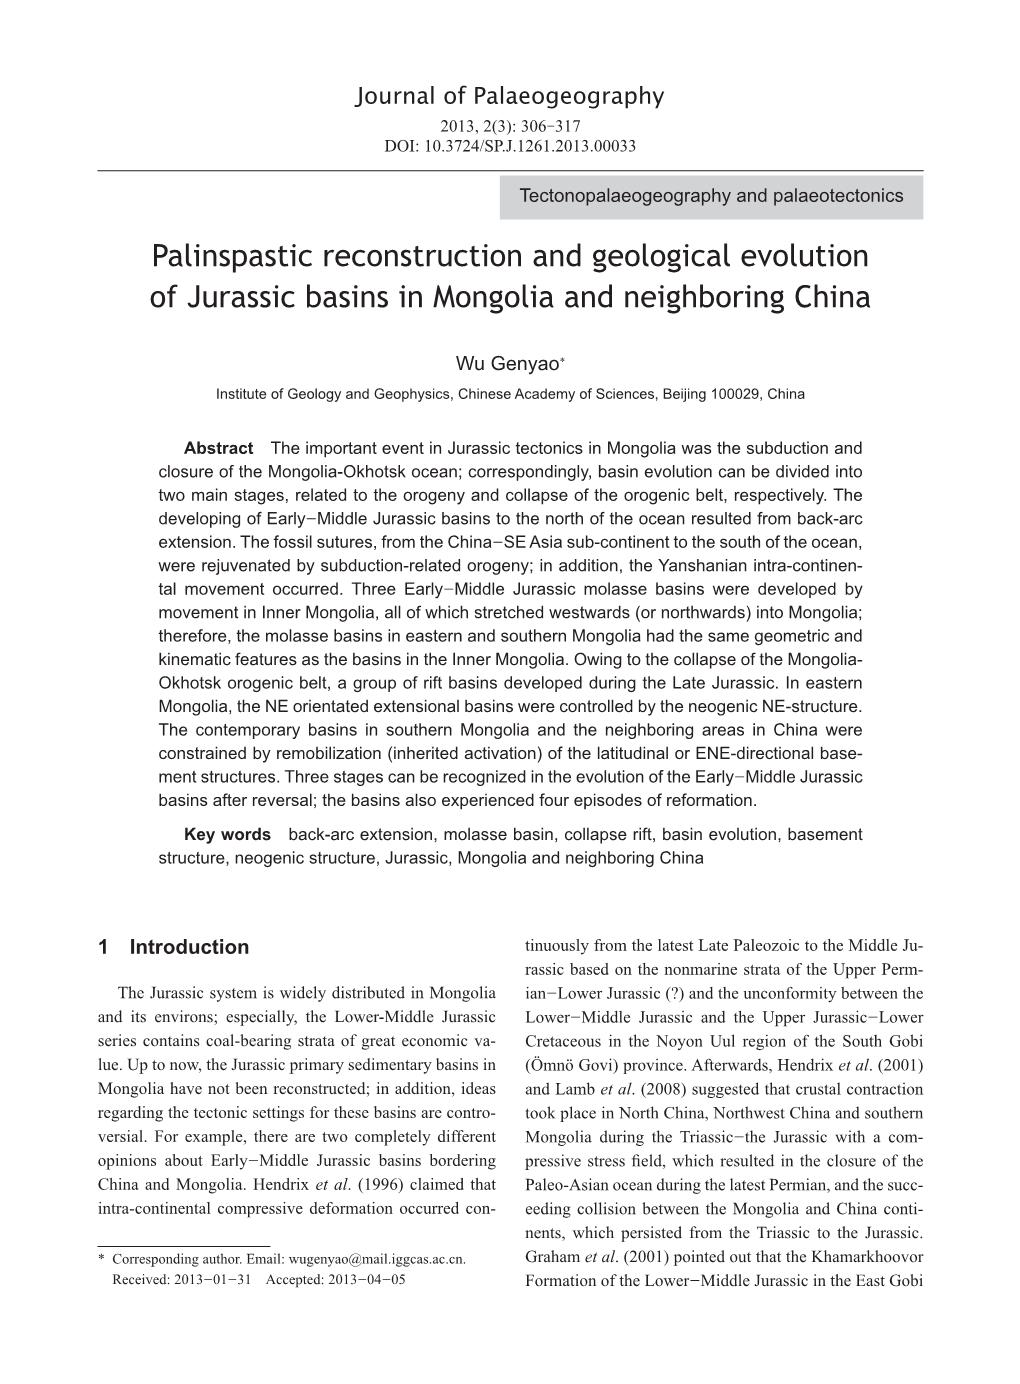 Palinspastic Reconstruction and Geological Evolution of Jurassic Basins in Mongolia and Neighboring China